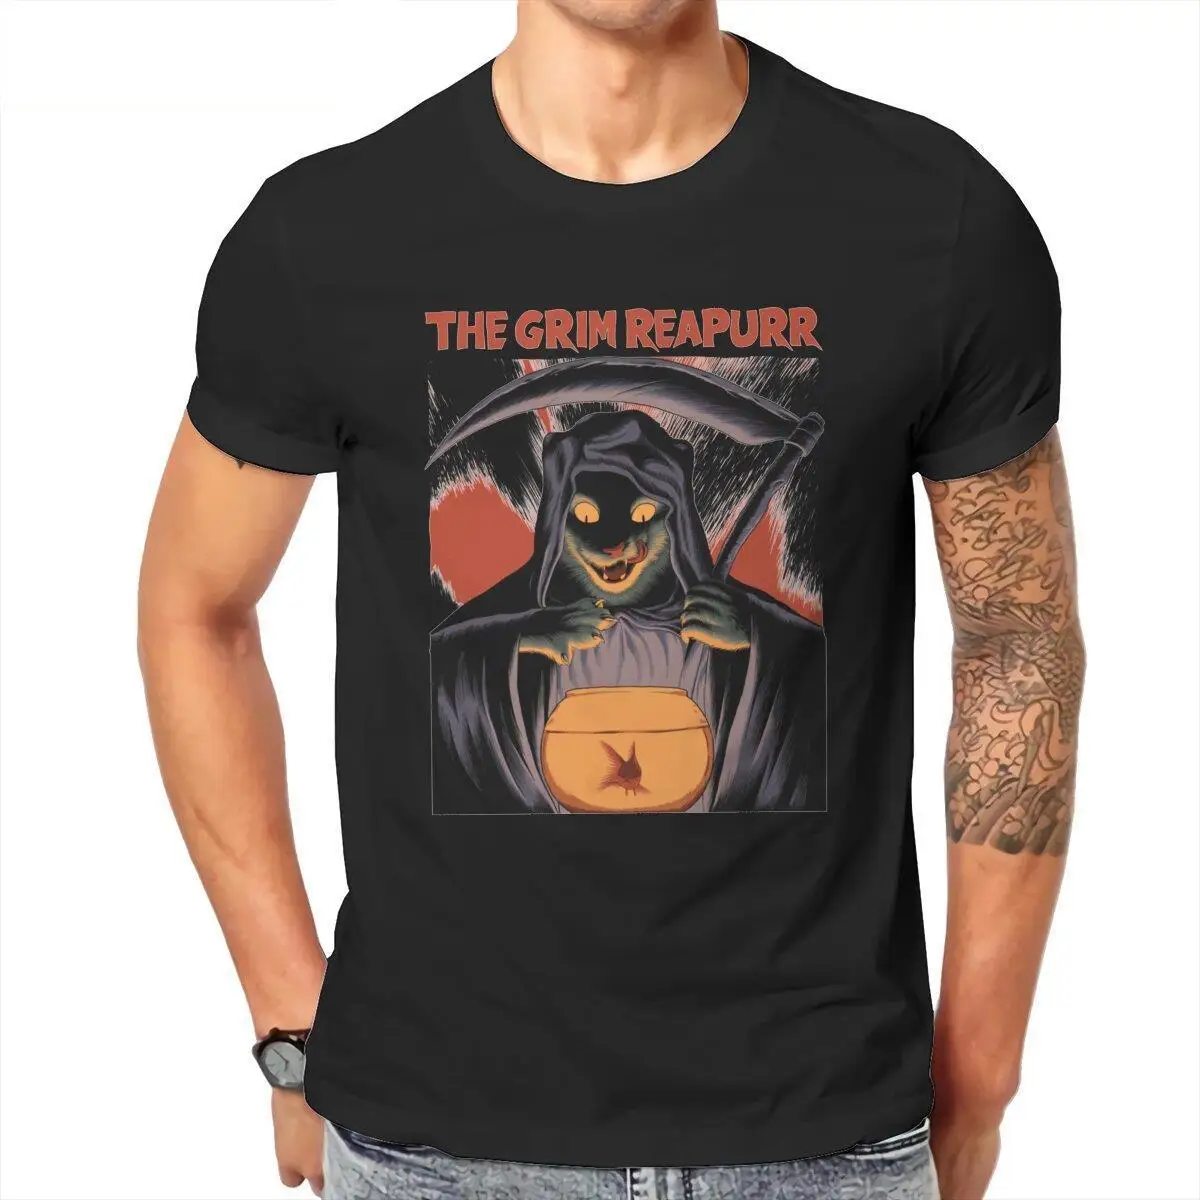 Leisure The Grim Reapurr  T-Shirt for Men Crew Neck Cotton T Shirts Horror Cat Short Sleeve Tees Summer Clothing